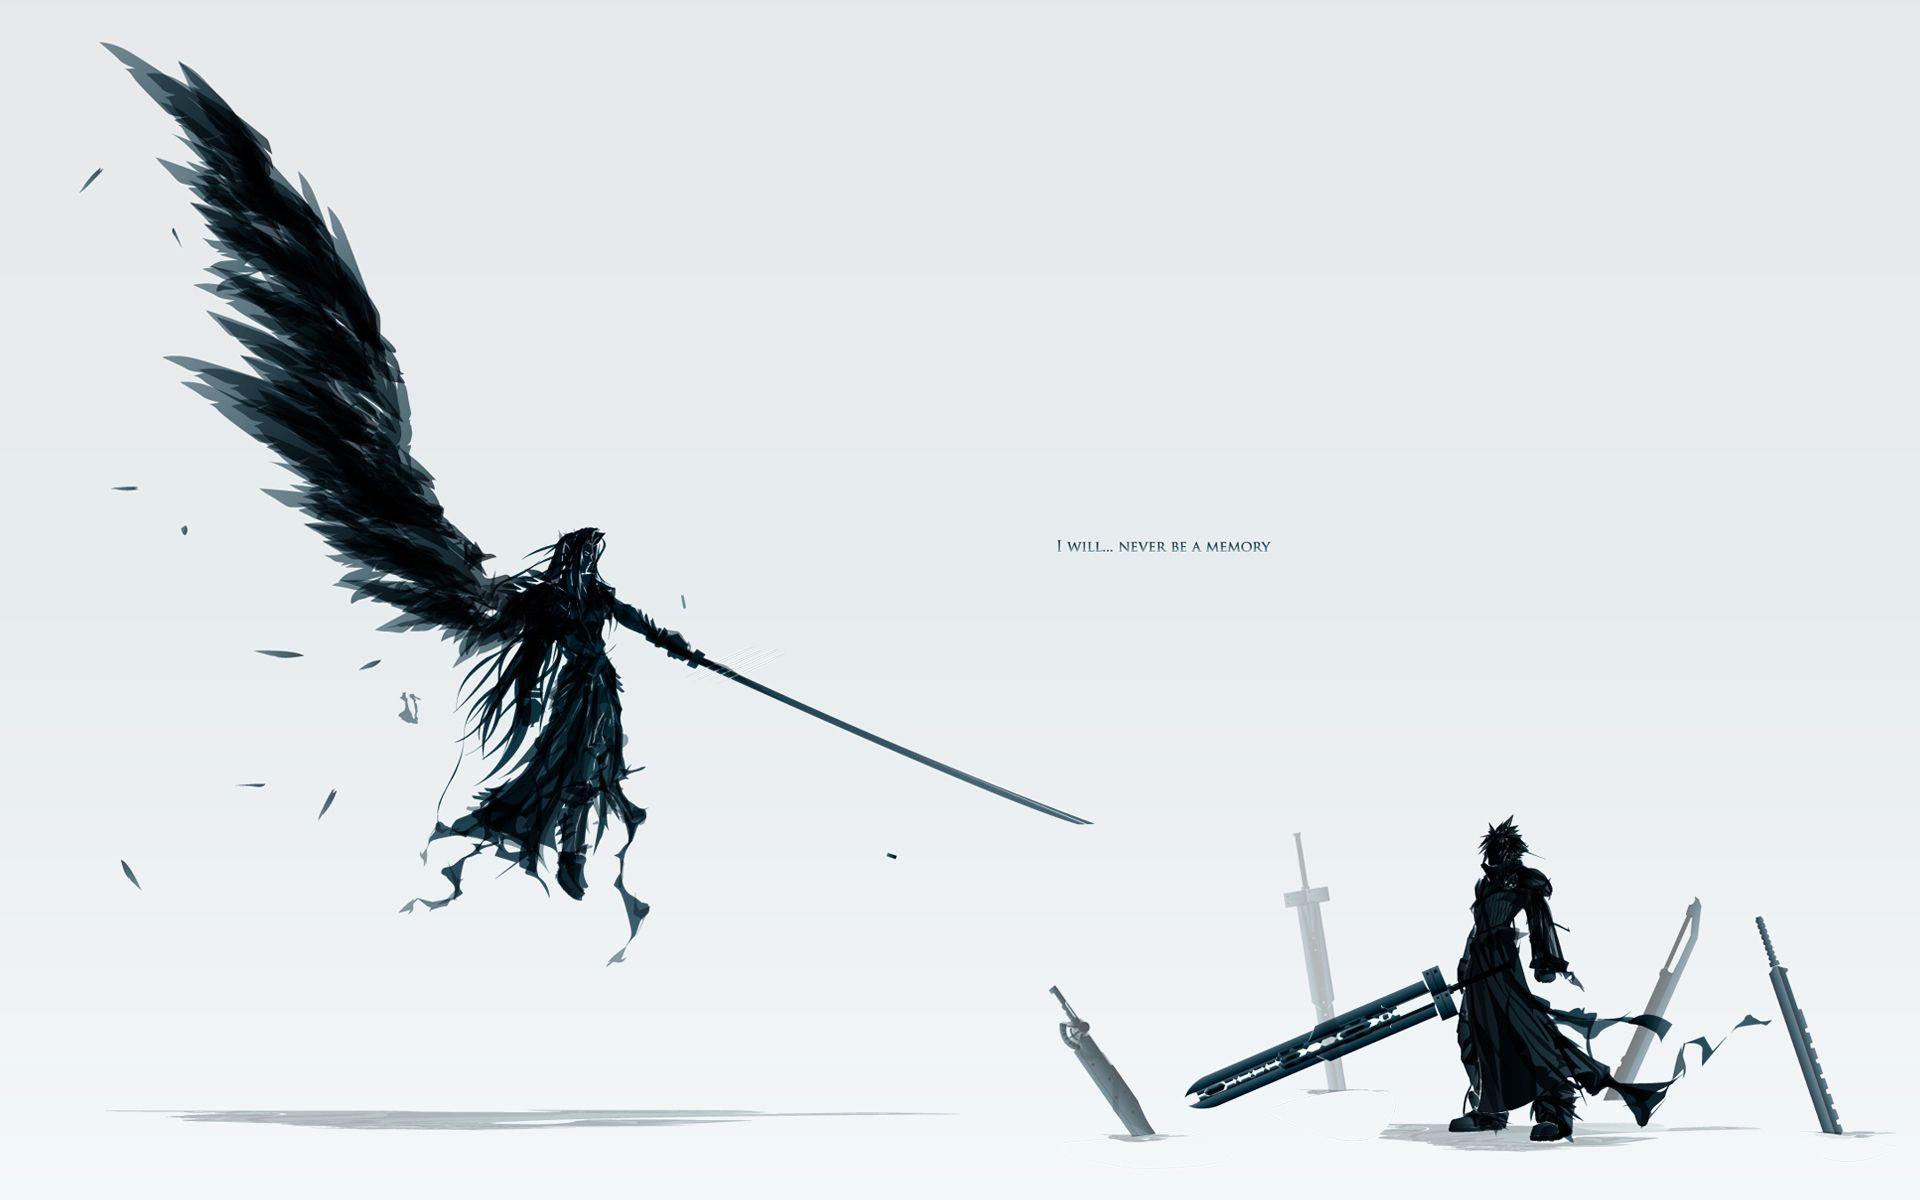 Final Fantasy HD Wallpaper and Background